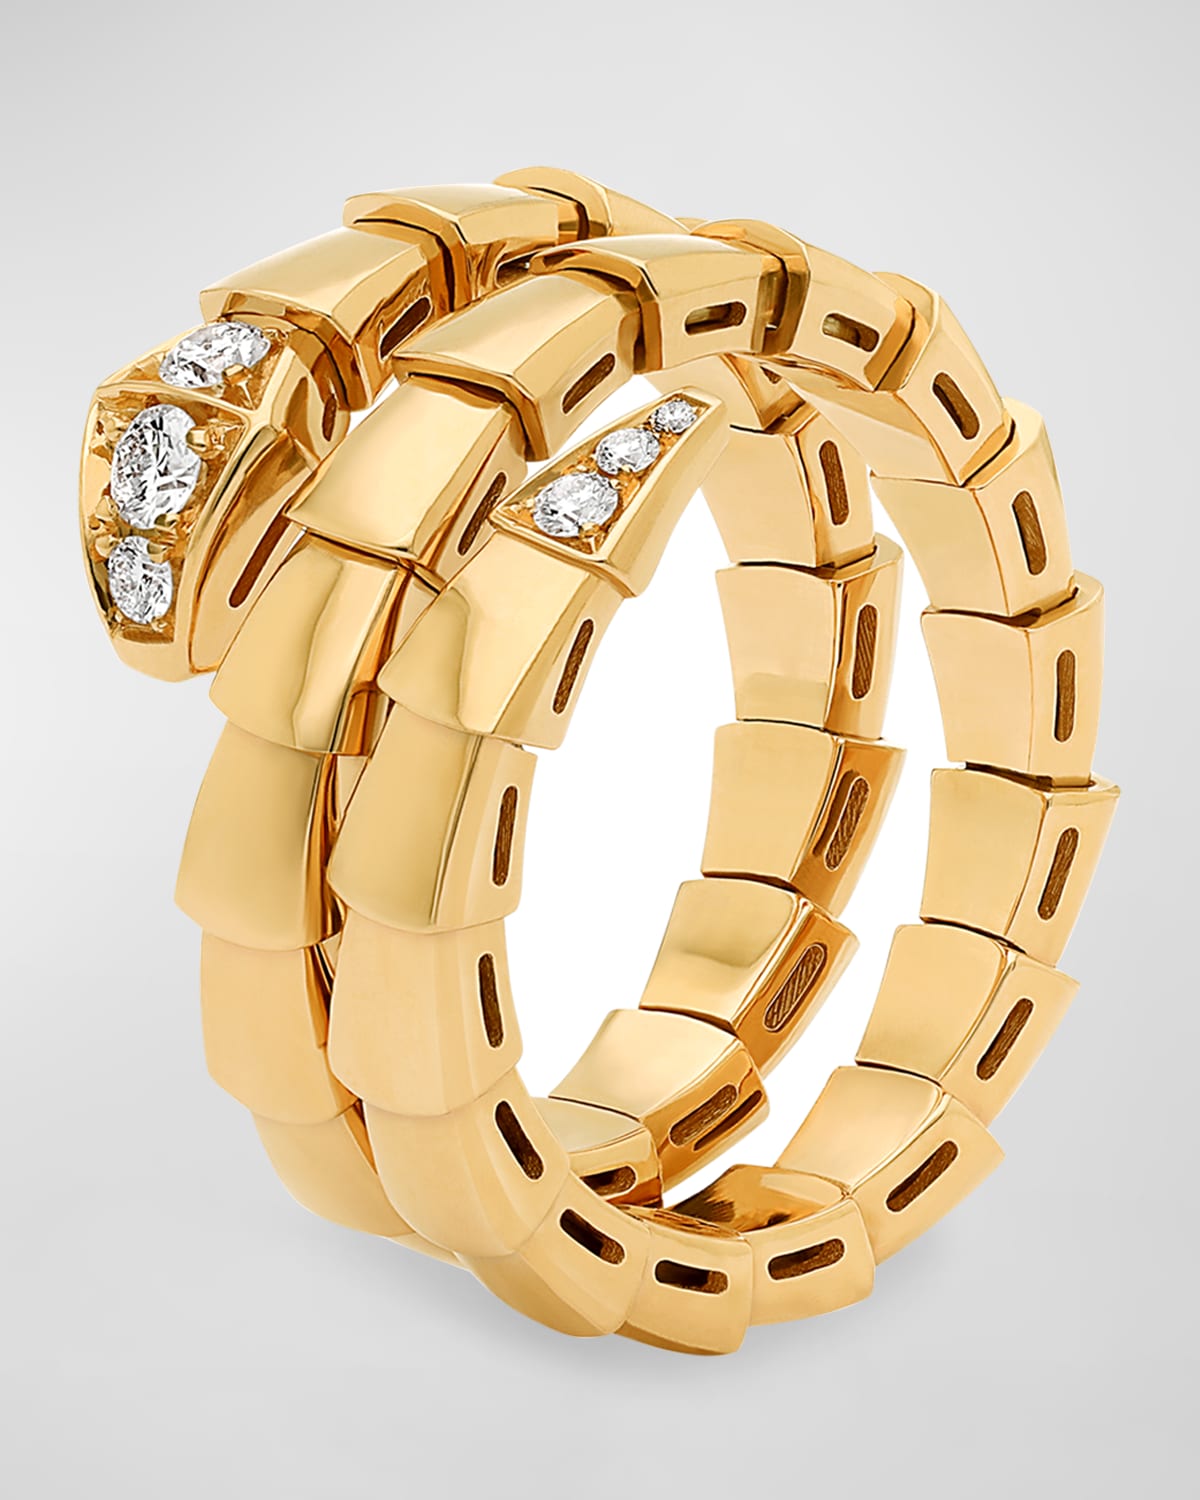 Serpenti Viper 2-Coil Ring in 18k Yellow Gold and Diamonds, Size M